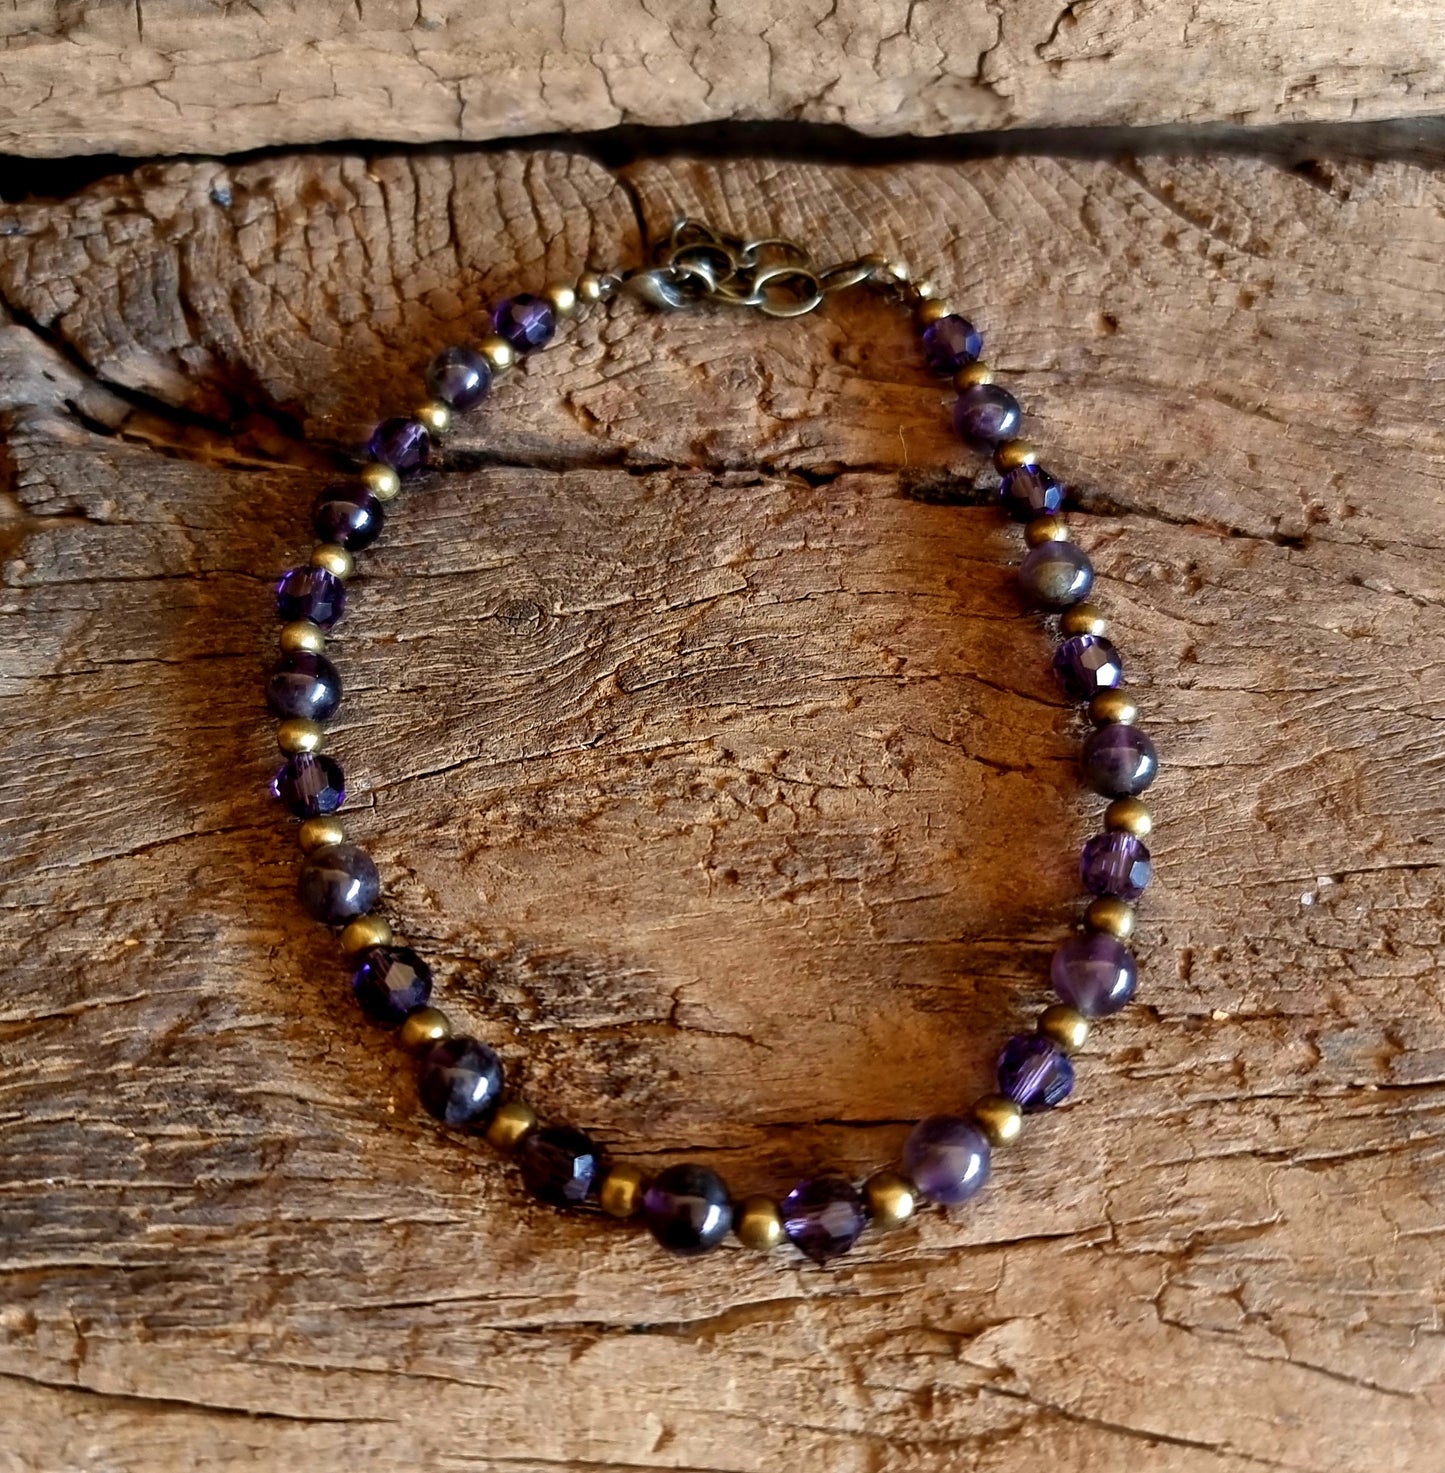 AMETHYST BOHEMIAN ANKLE CHAIN - PSYCHIC ABILITIES